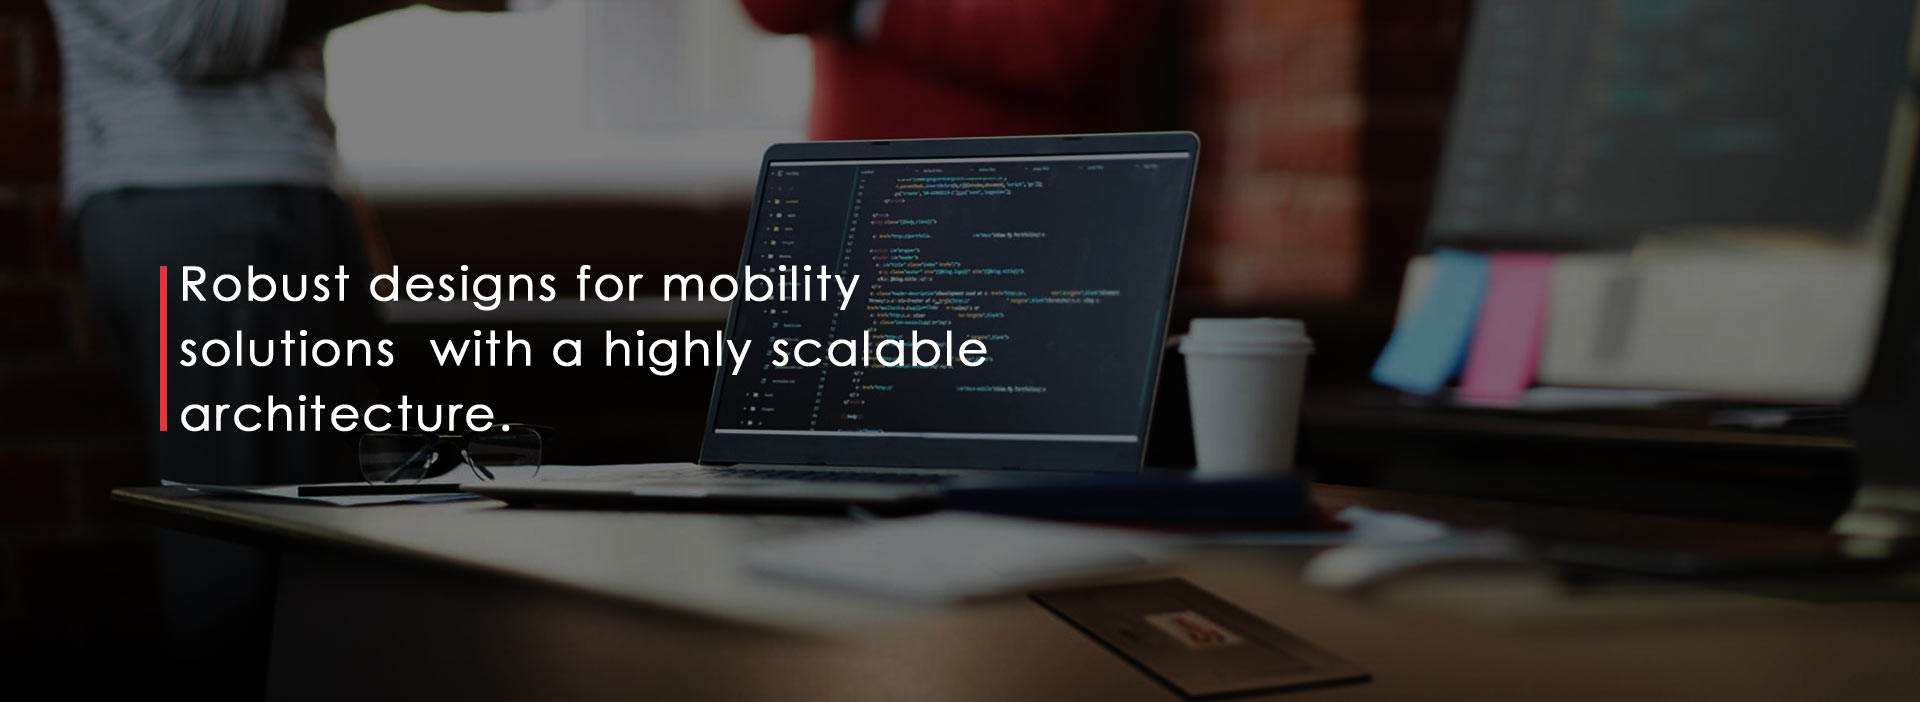 Mobility solutions